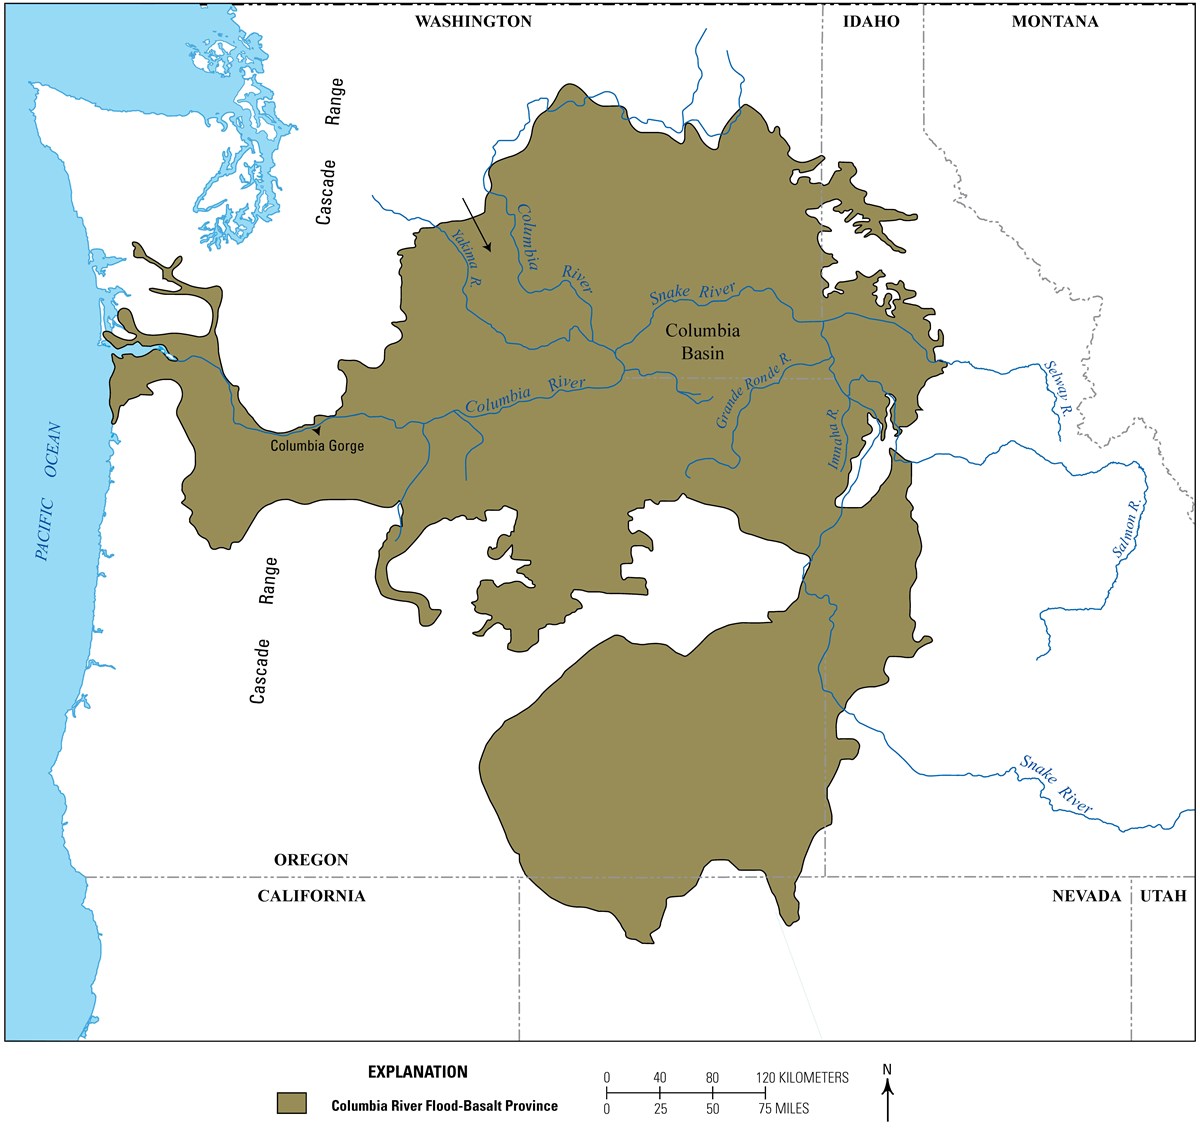 map of the US northwest showing the extent of columbia river flood basalts in Idaho, Washington, Oregon, and Nevada.